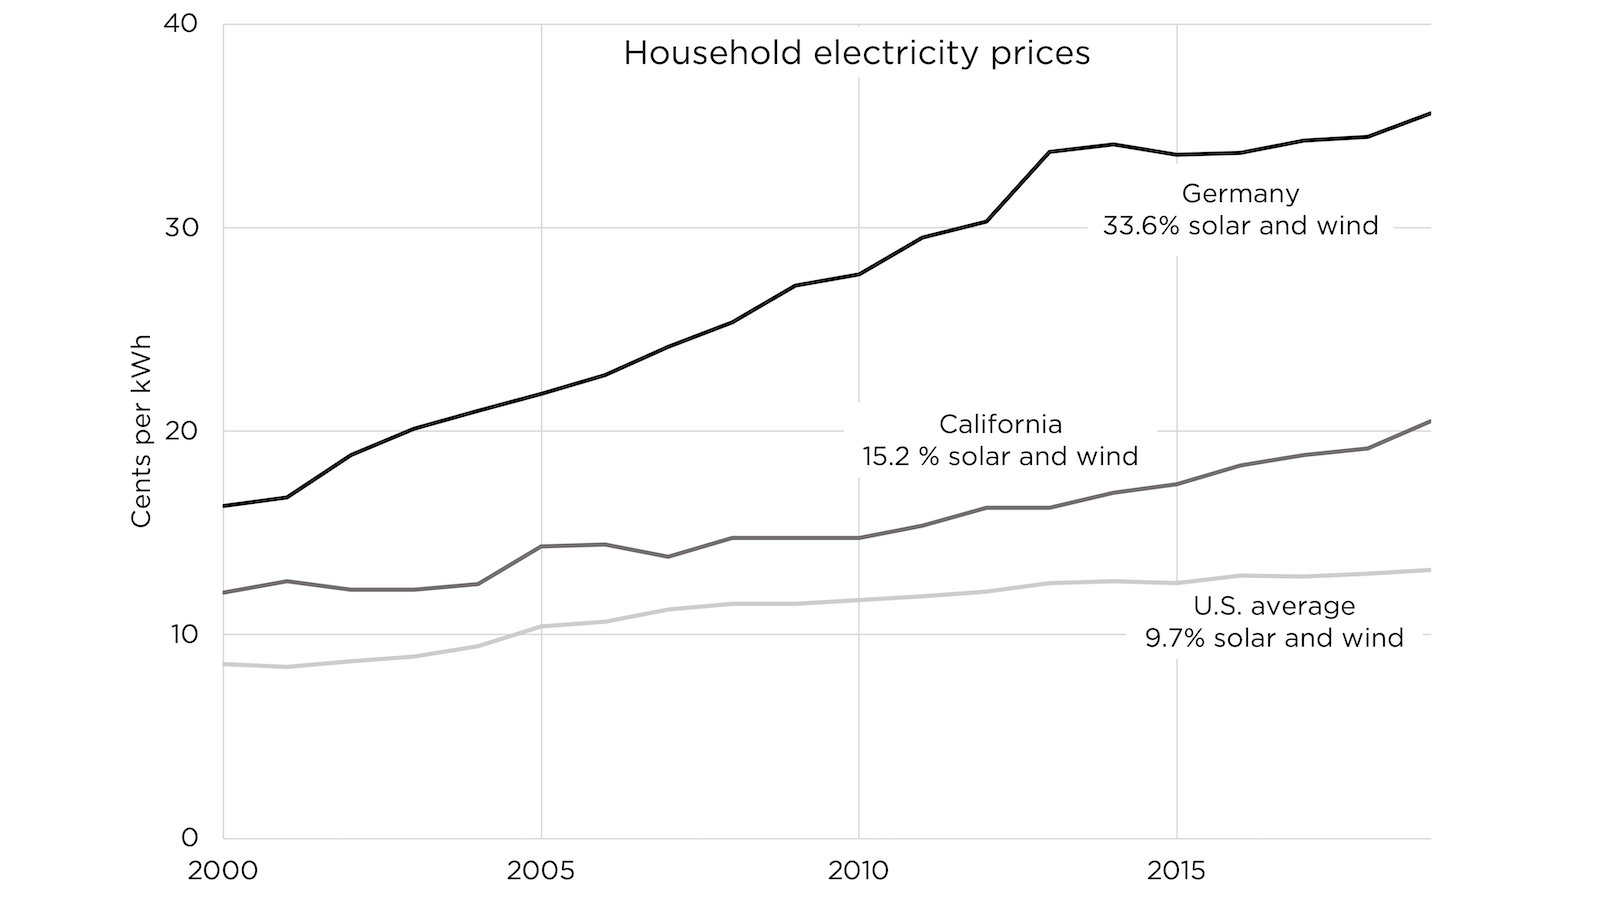 Household electricity prices